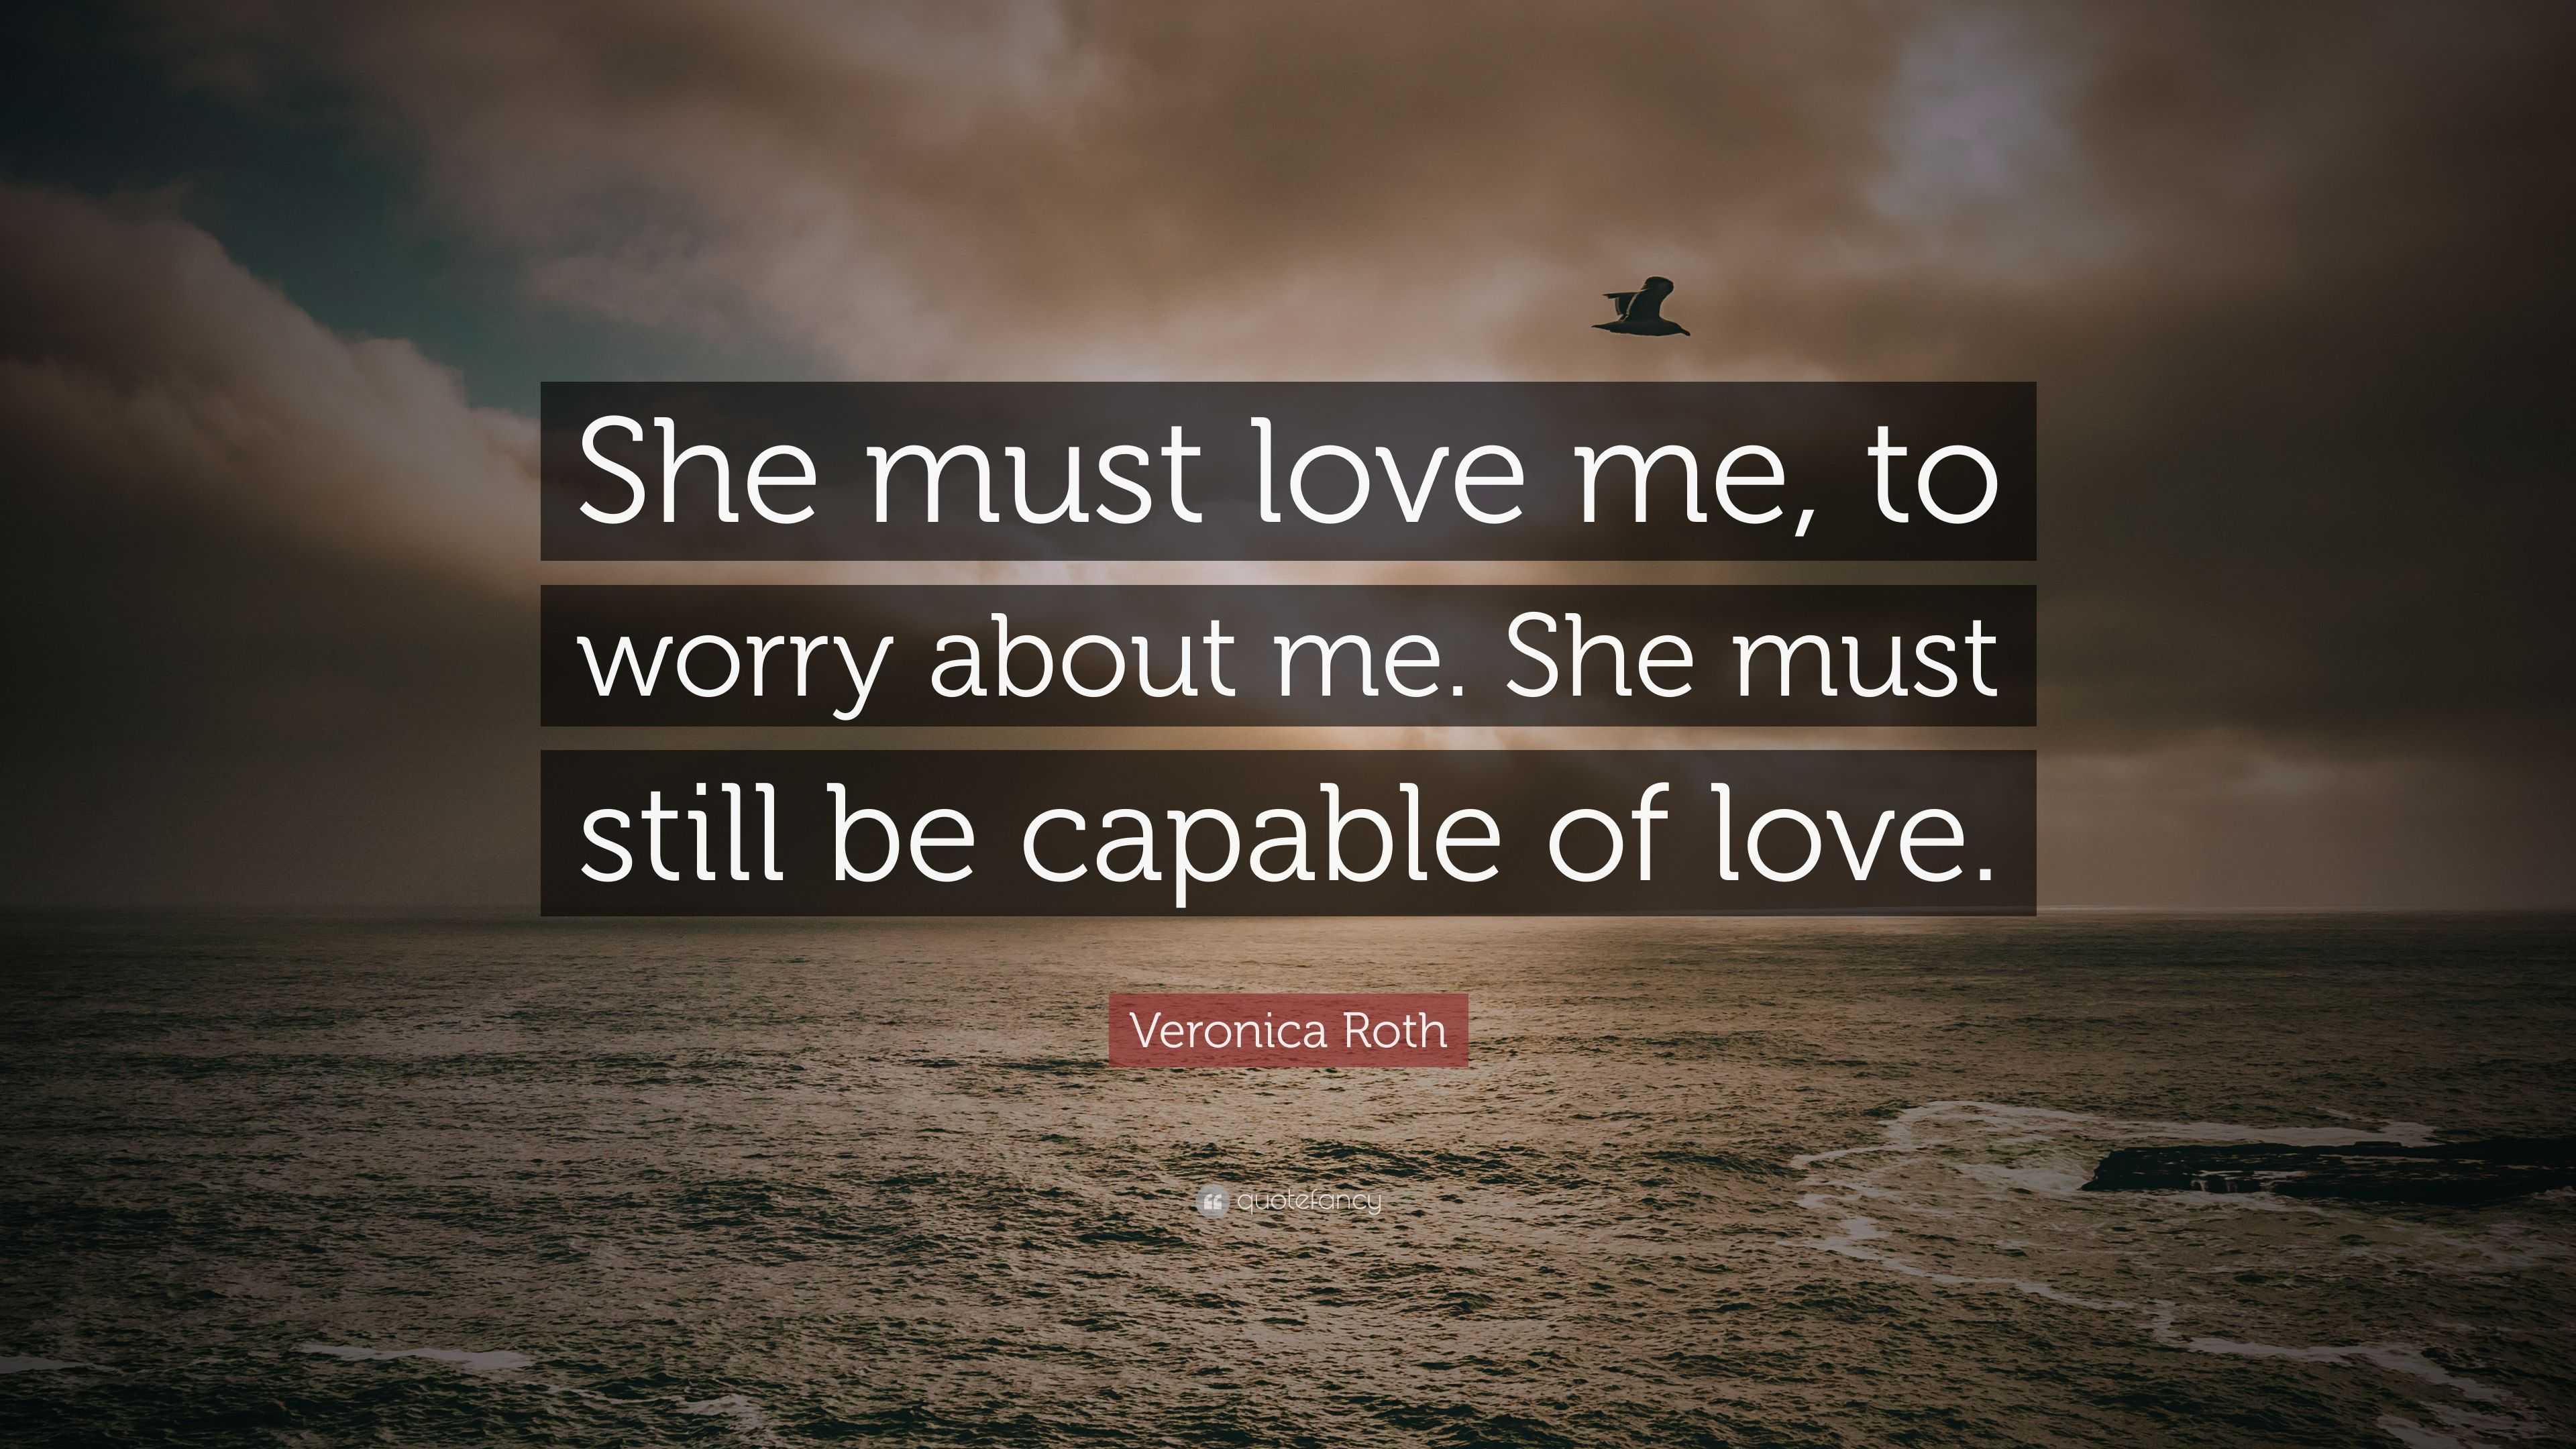 Veronica Roth Quote: “She must love me, to worry about me. She must ...